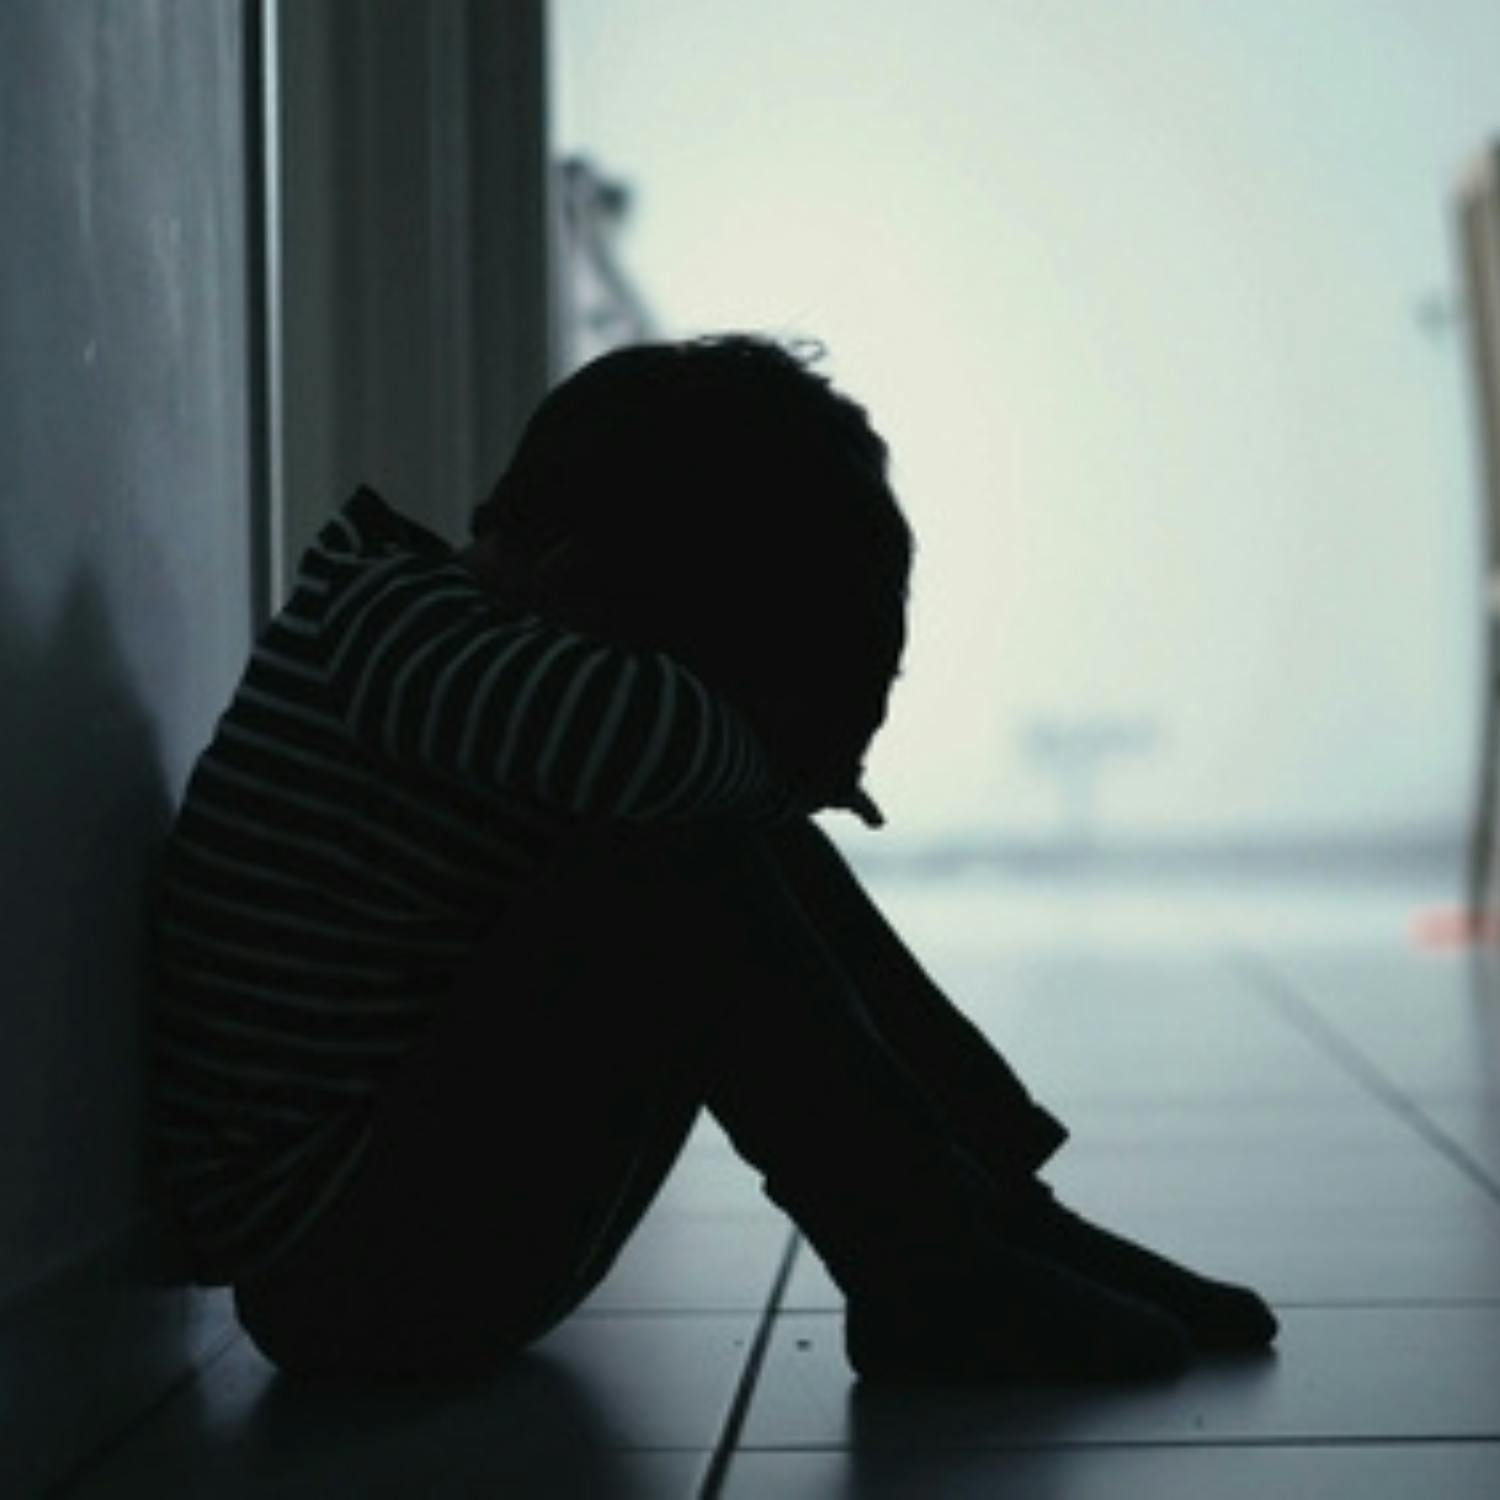 Barnardos launch campaign for kids against domestic violence and abuse.